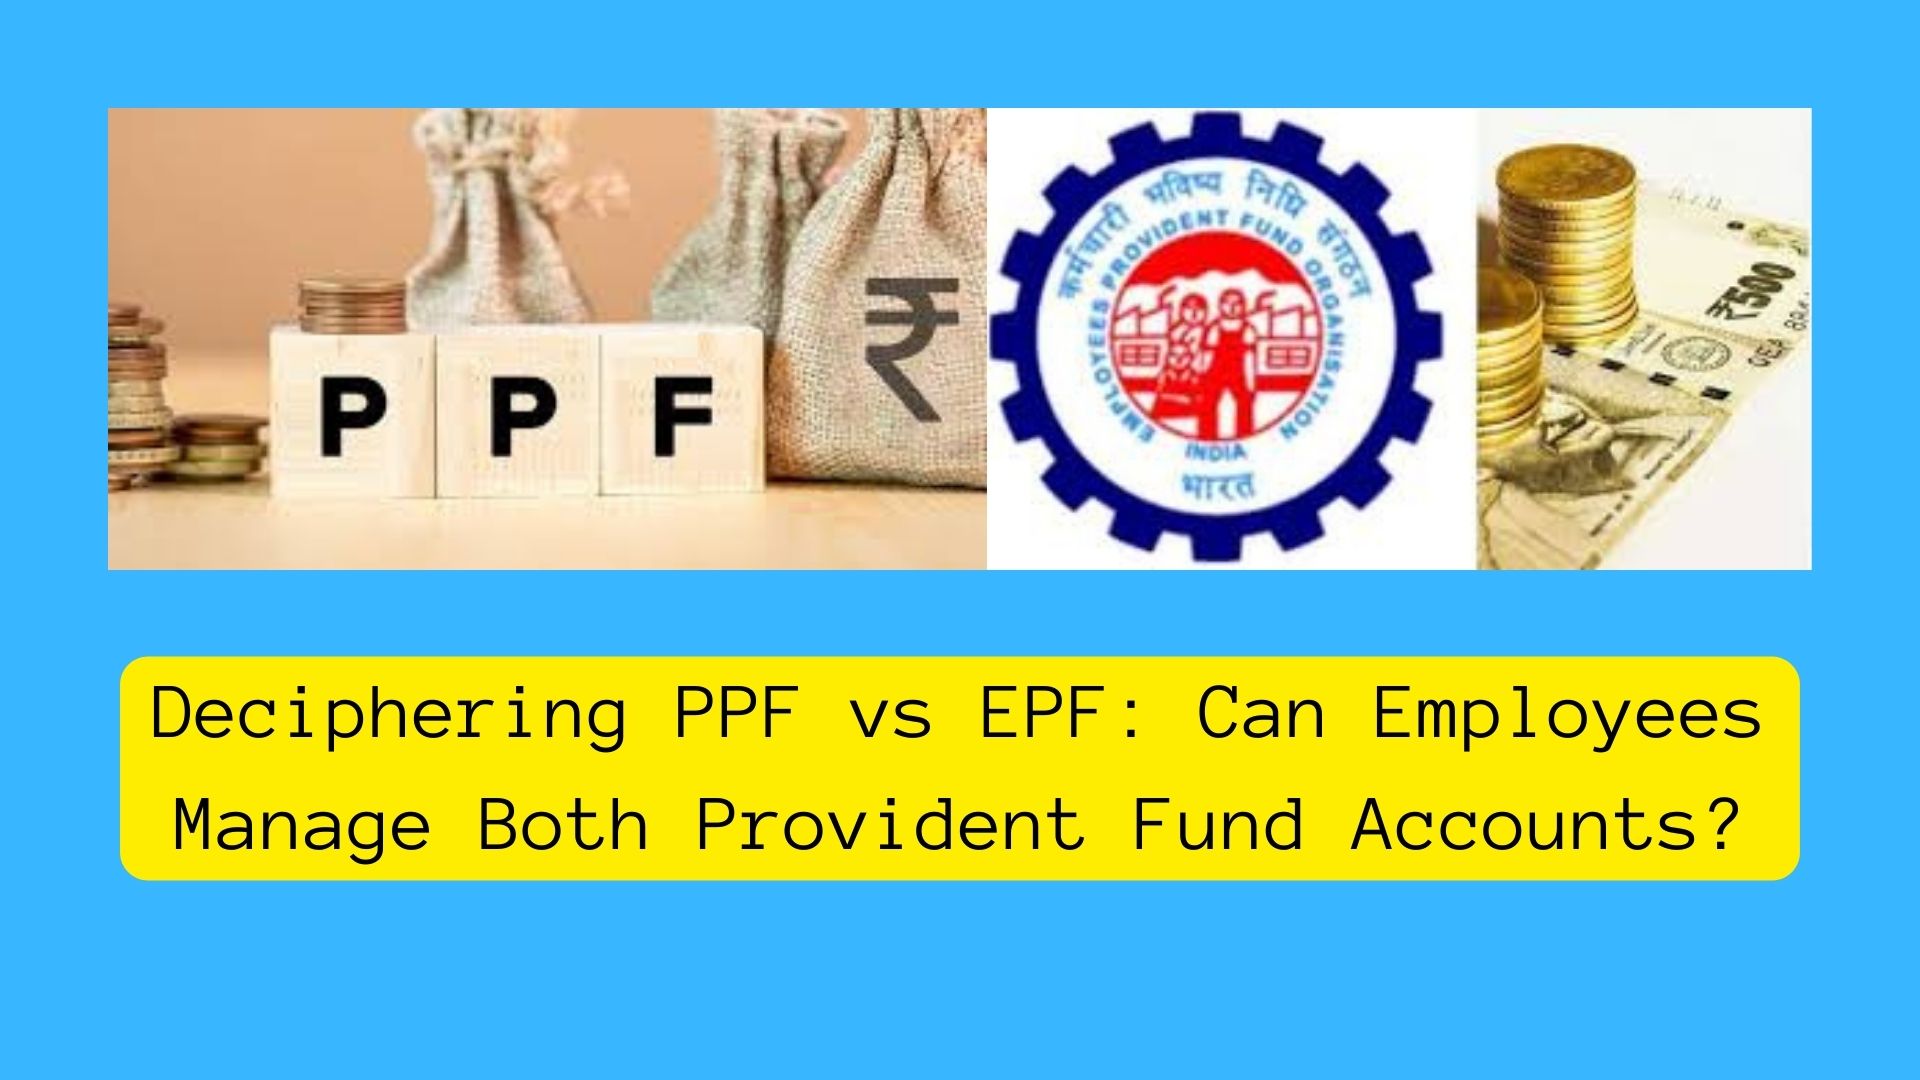 Deciphering PPF vs EPF: Can Employees Manage Both Provident Fund Accounts?